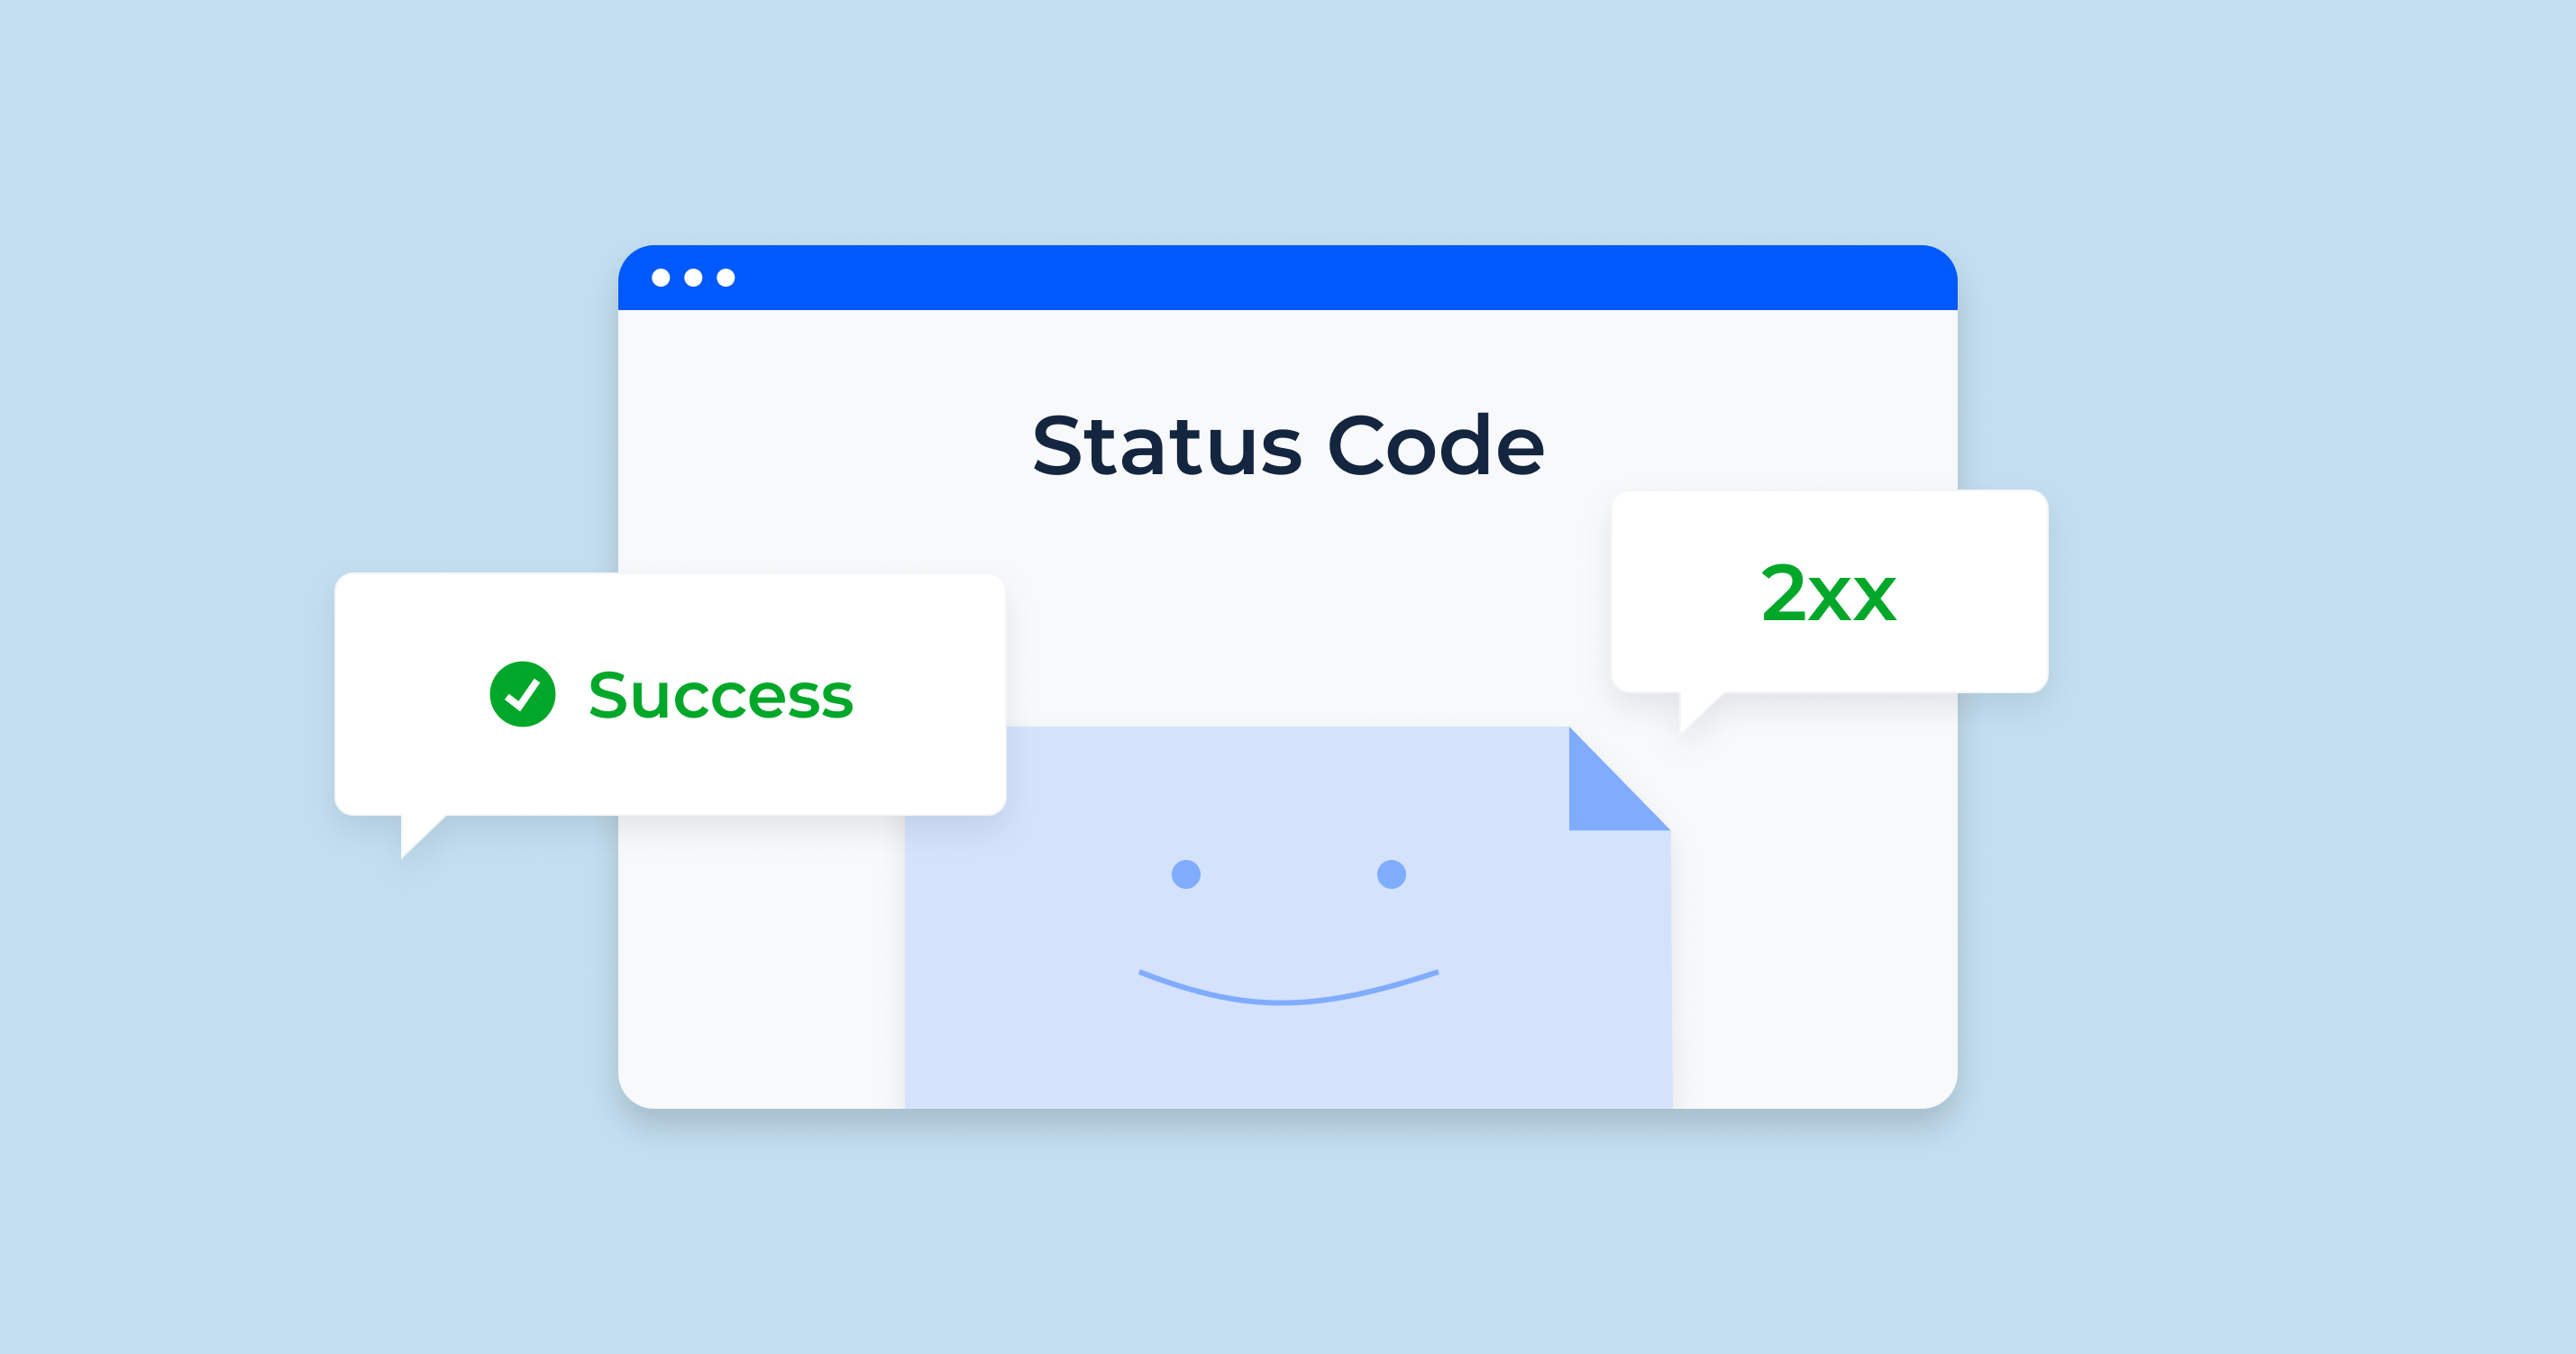 Check if the page returns a 2xx status code so it starts working correctly.